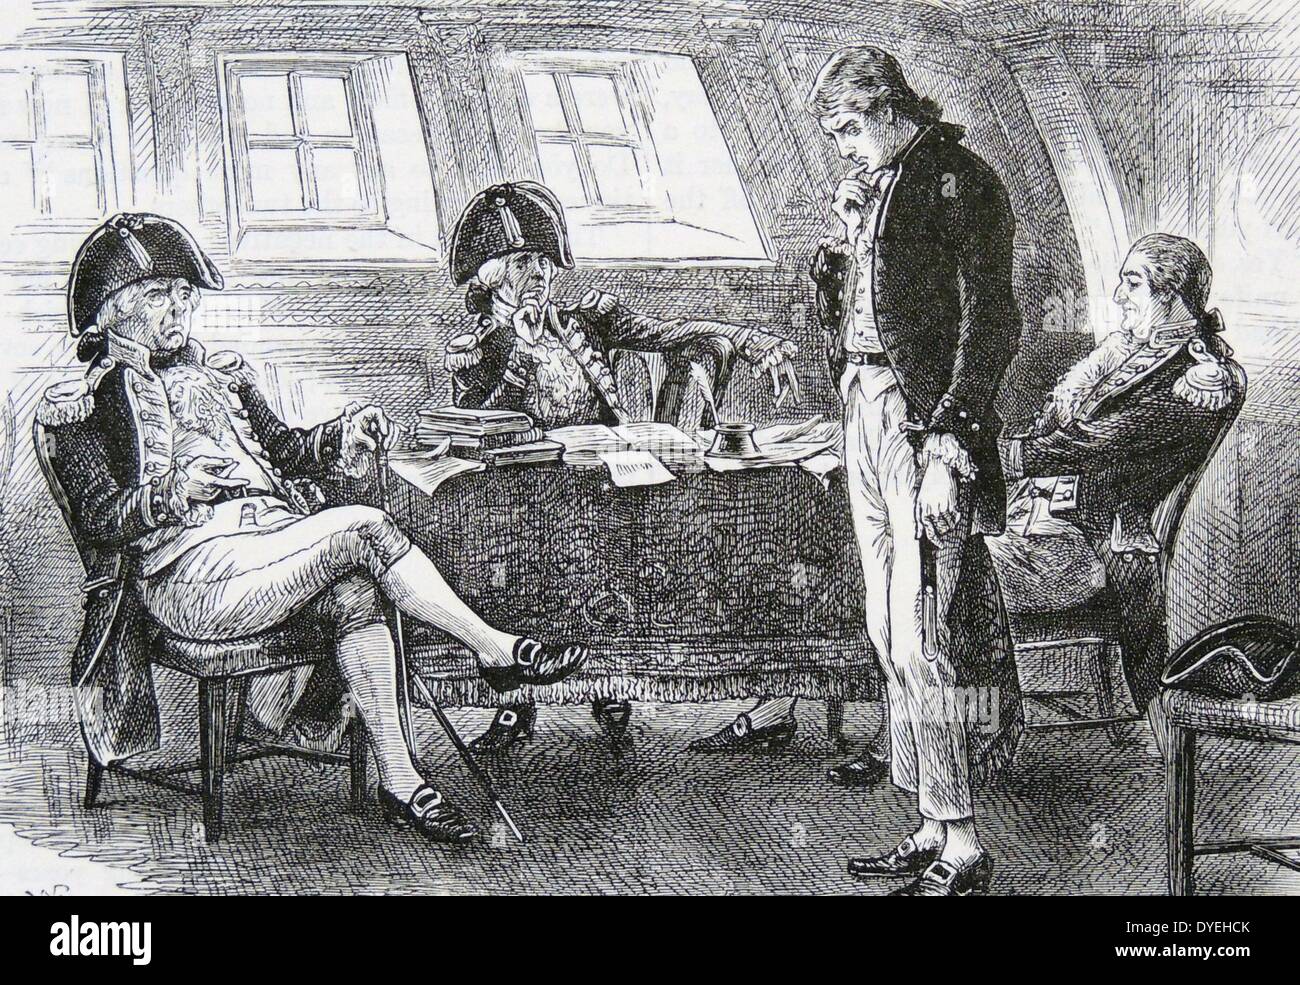 Peter Simple, his midshipman's uniform shrunk by a ducking in the sea,  before the naval  examination board. Illustration of 1882 from ''Peter Simple'' by Captain Marryat, originally published 1832. Stock Photo